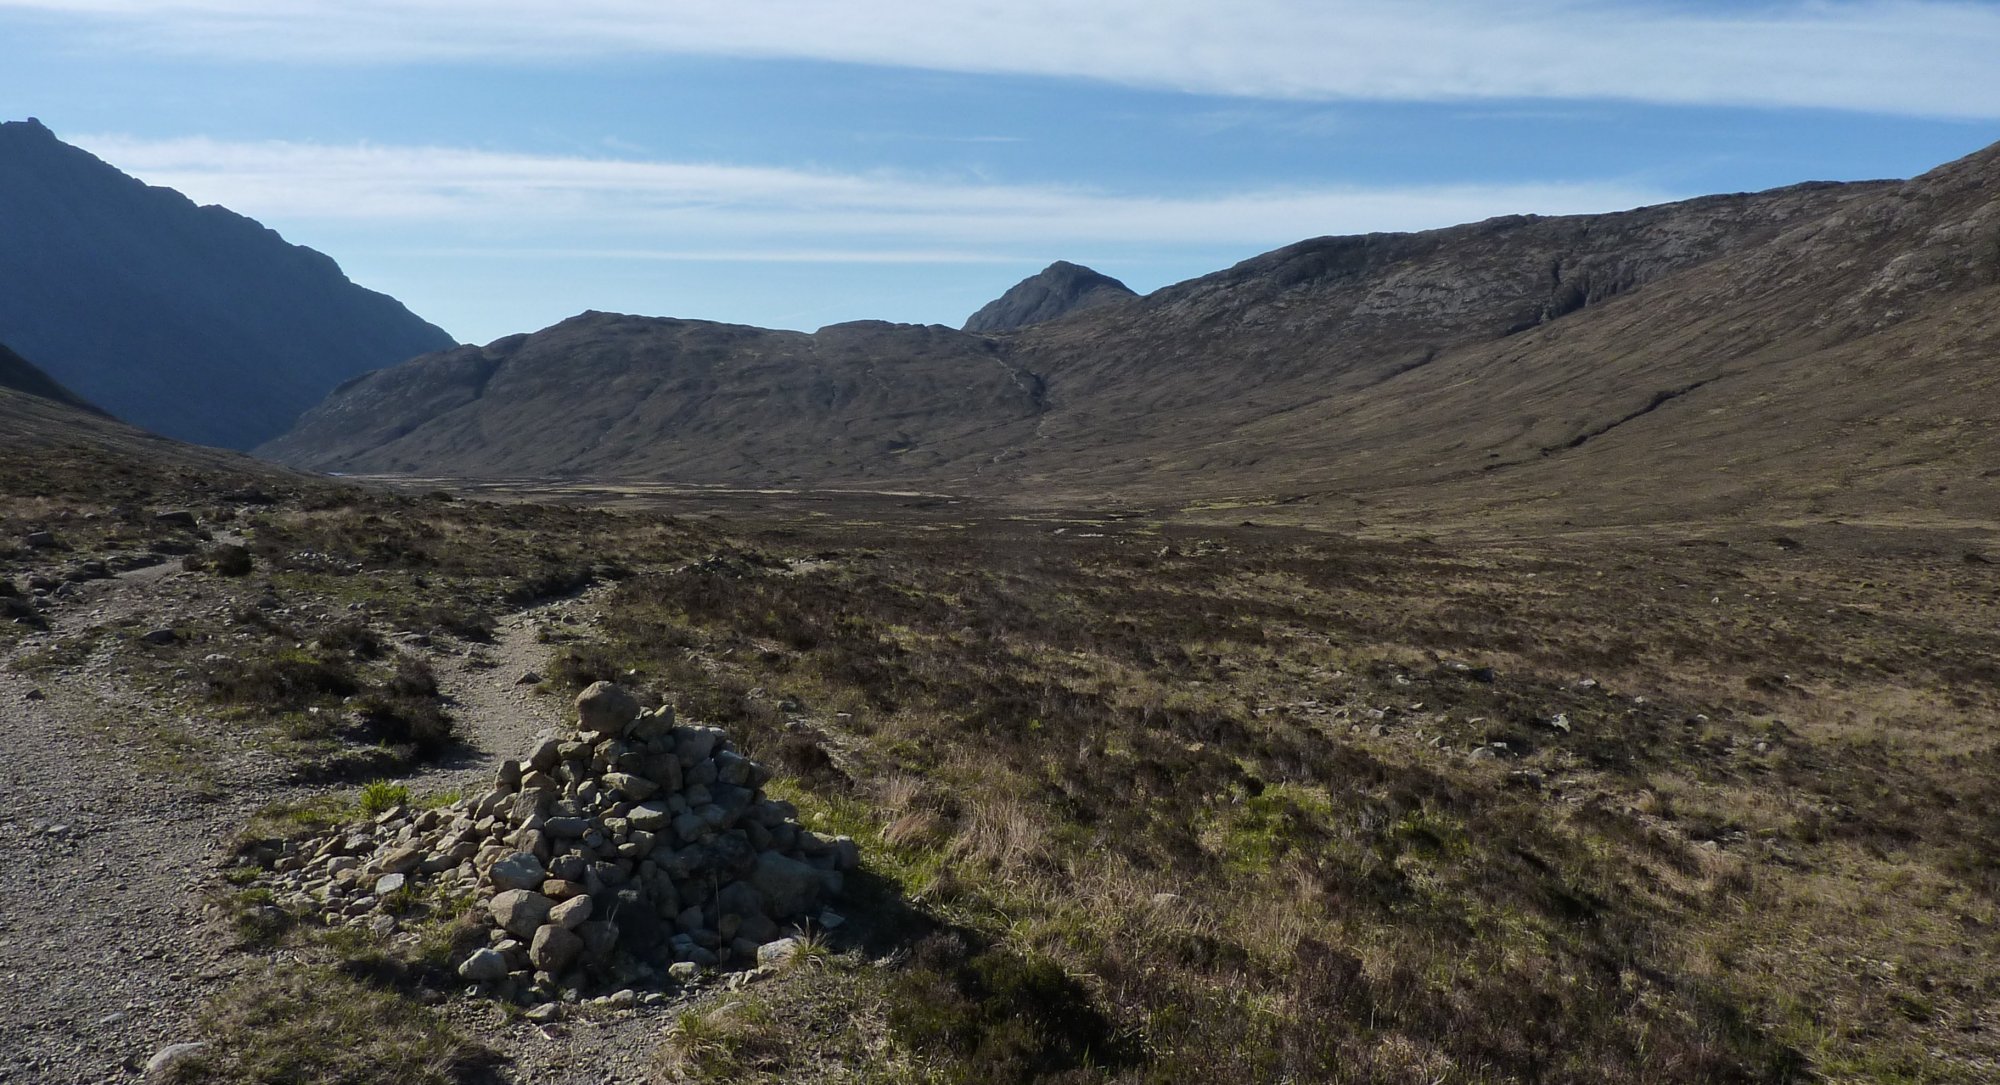 The 'decision cairn', left for the easy route, right means I have to take the Bad Step - I go left